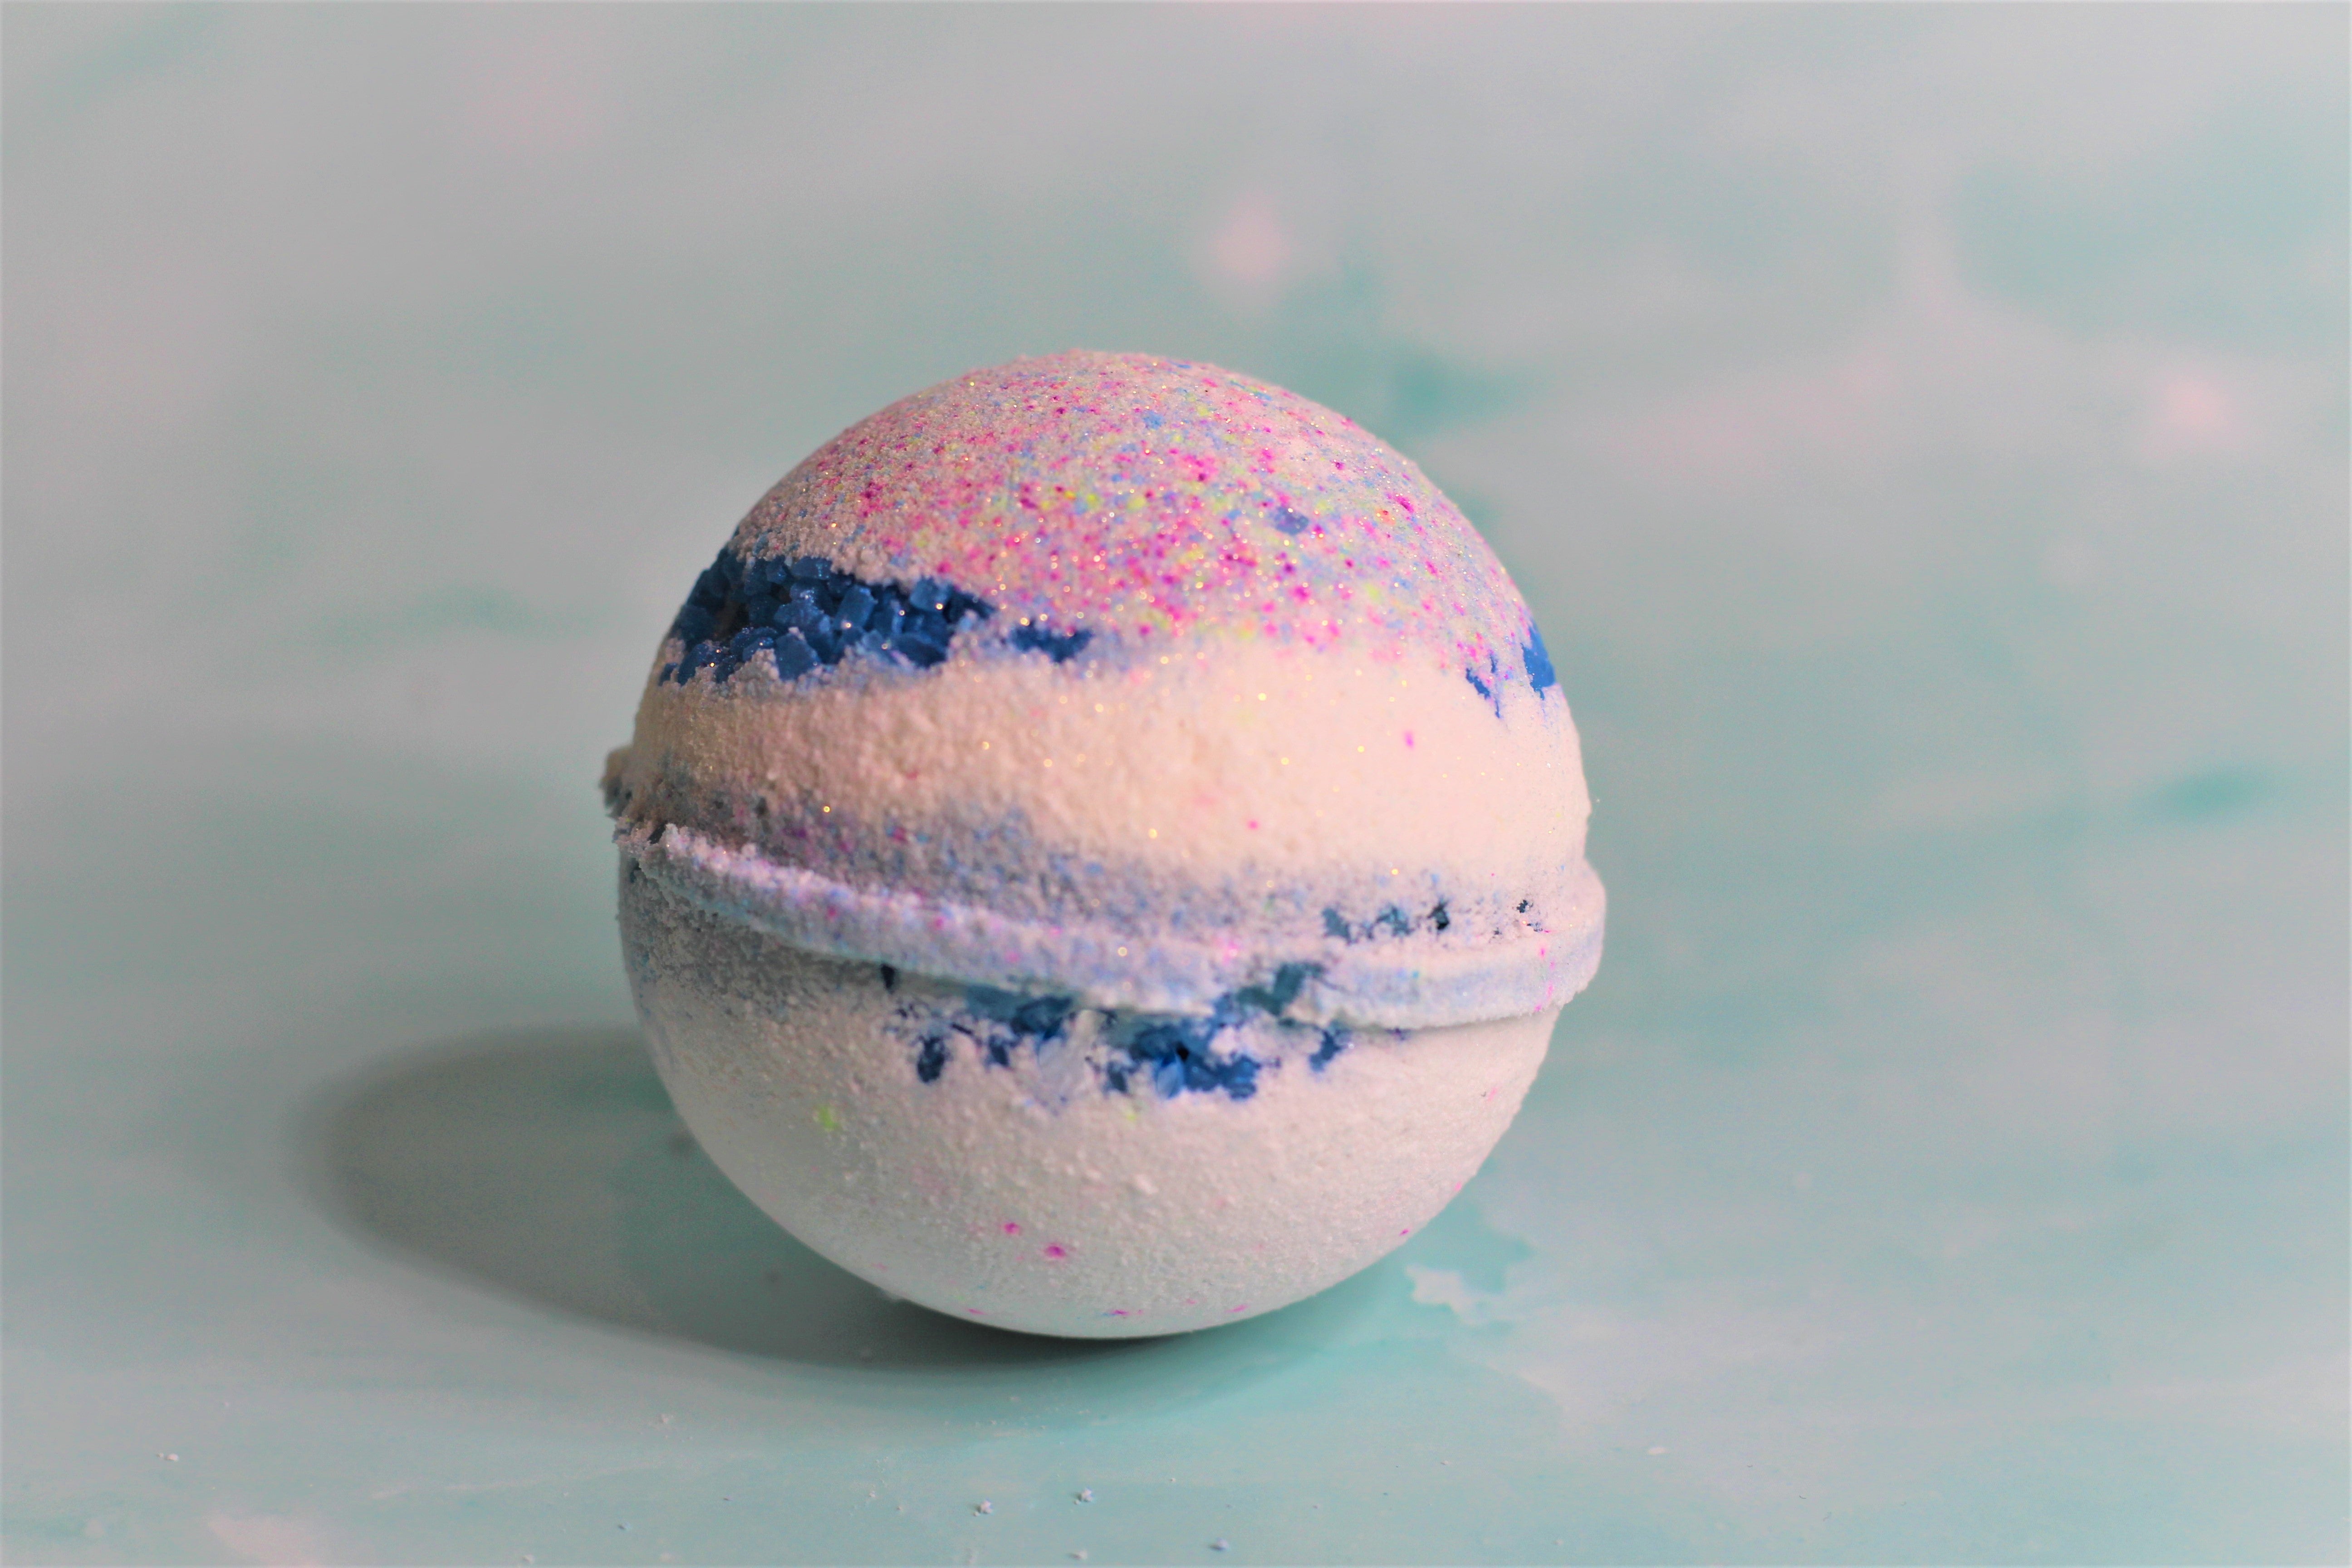 CHILL-OUT Bath Bomb